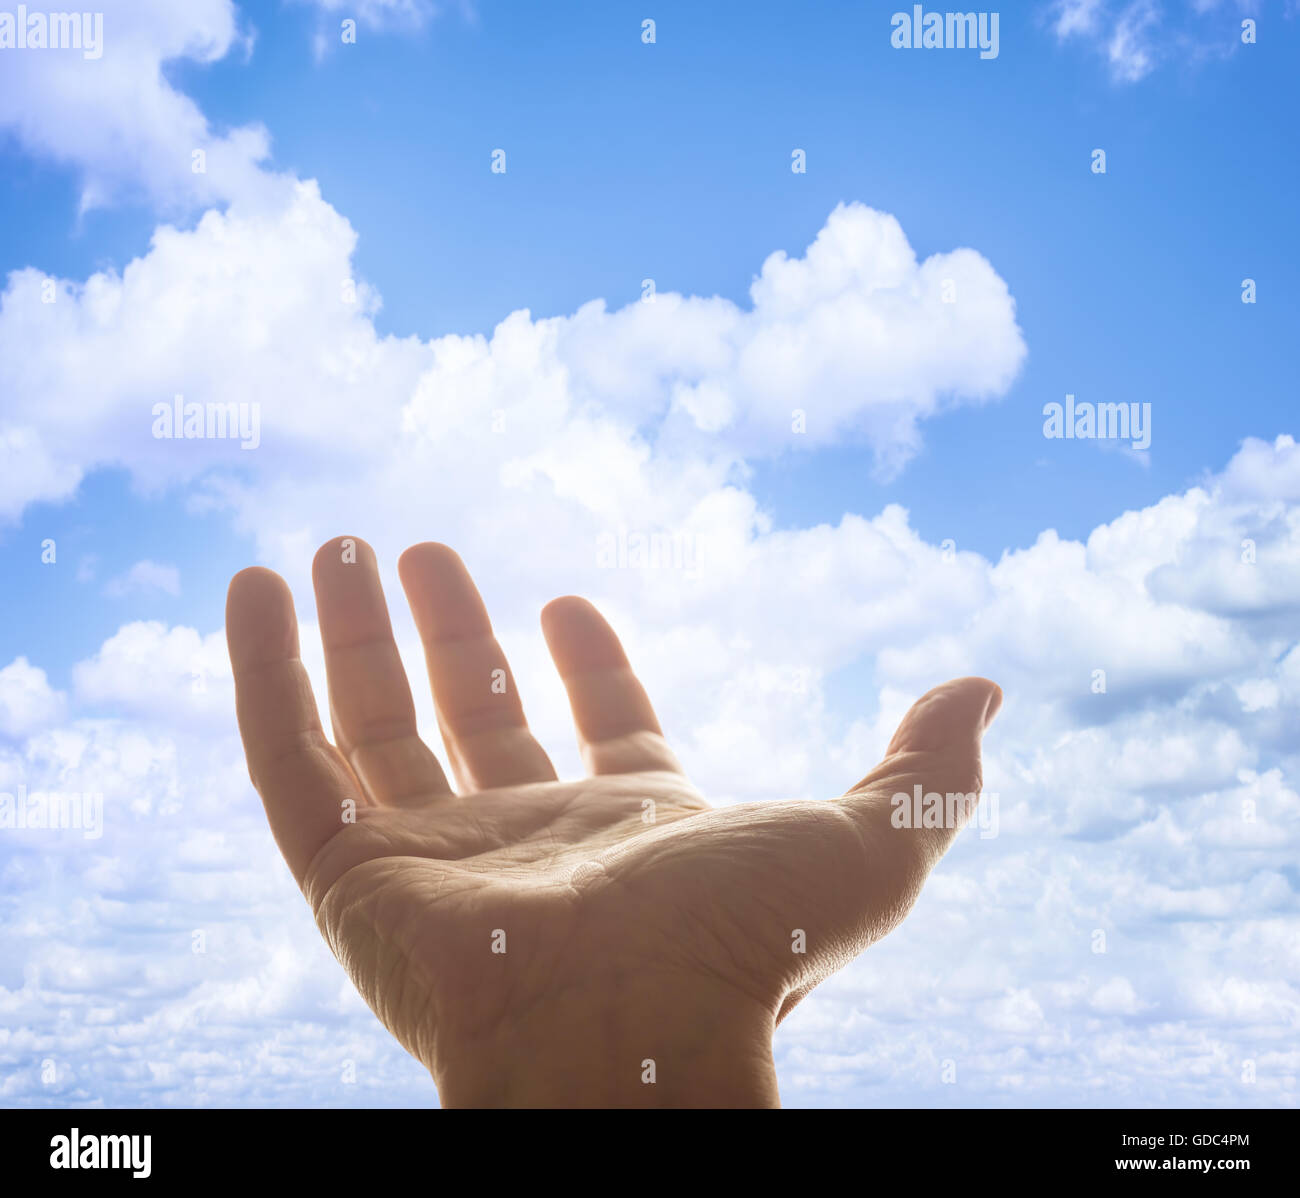 Opened hand raised to heaven in waiting for something. Depth of field with focus on palm. Clipping path included. Stock Photo